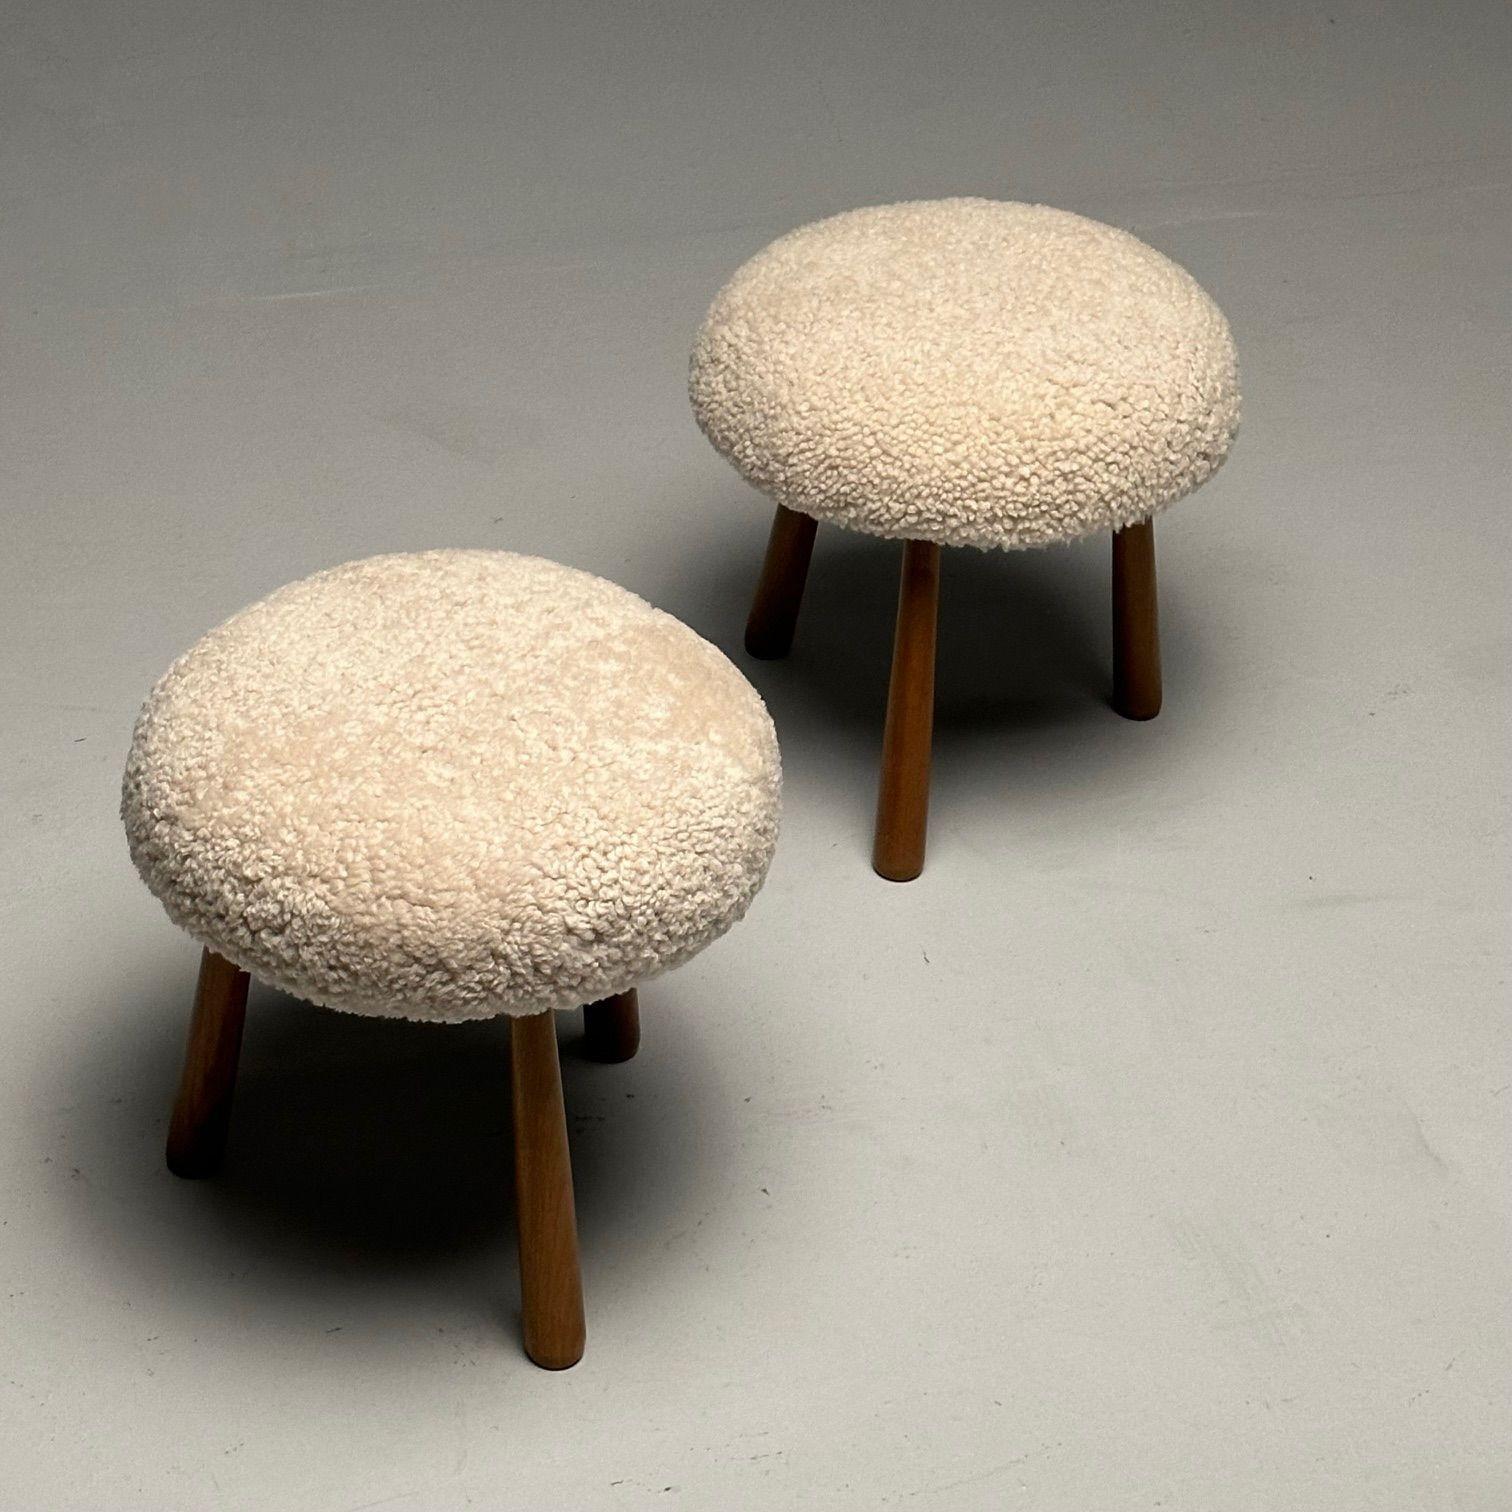 Pair Contemporary Sheepskin Stools / Ottomans, Swedish Modern Style, Shearling For Sale 1